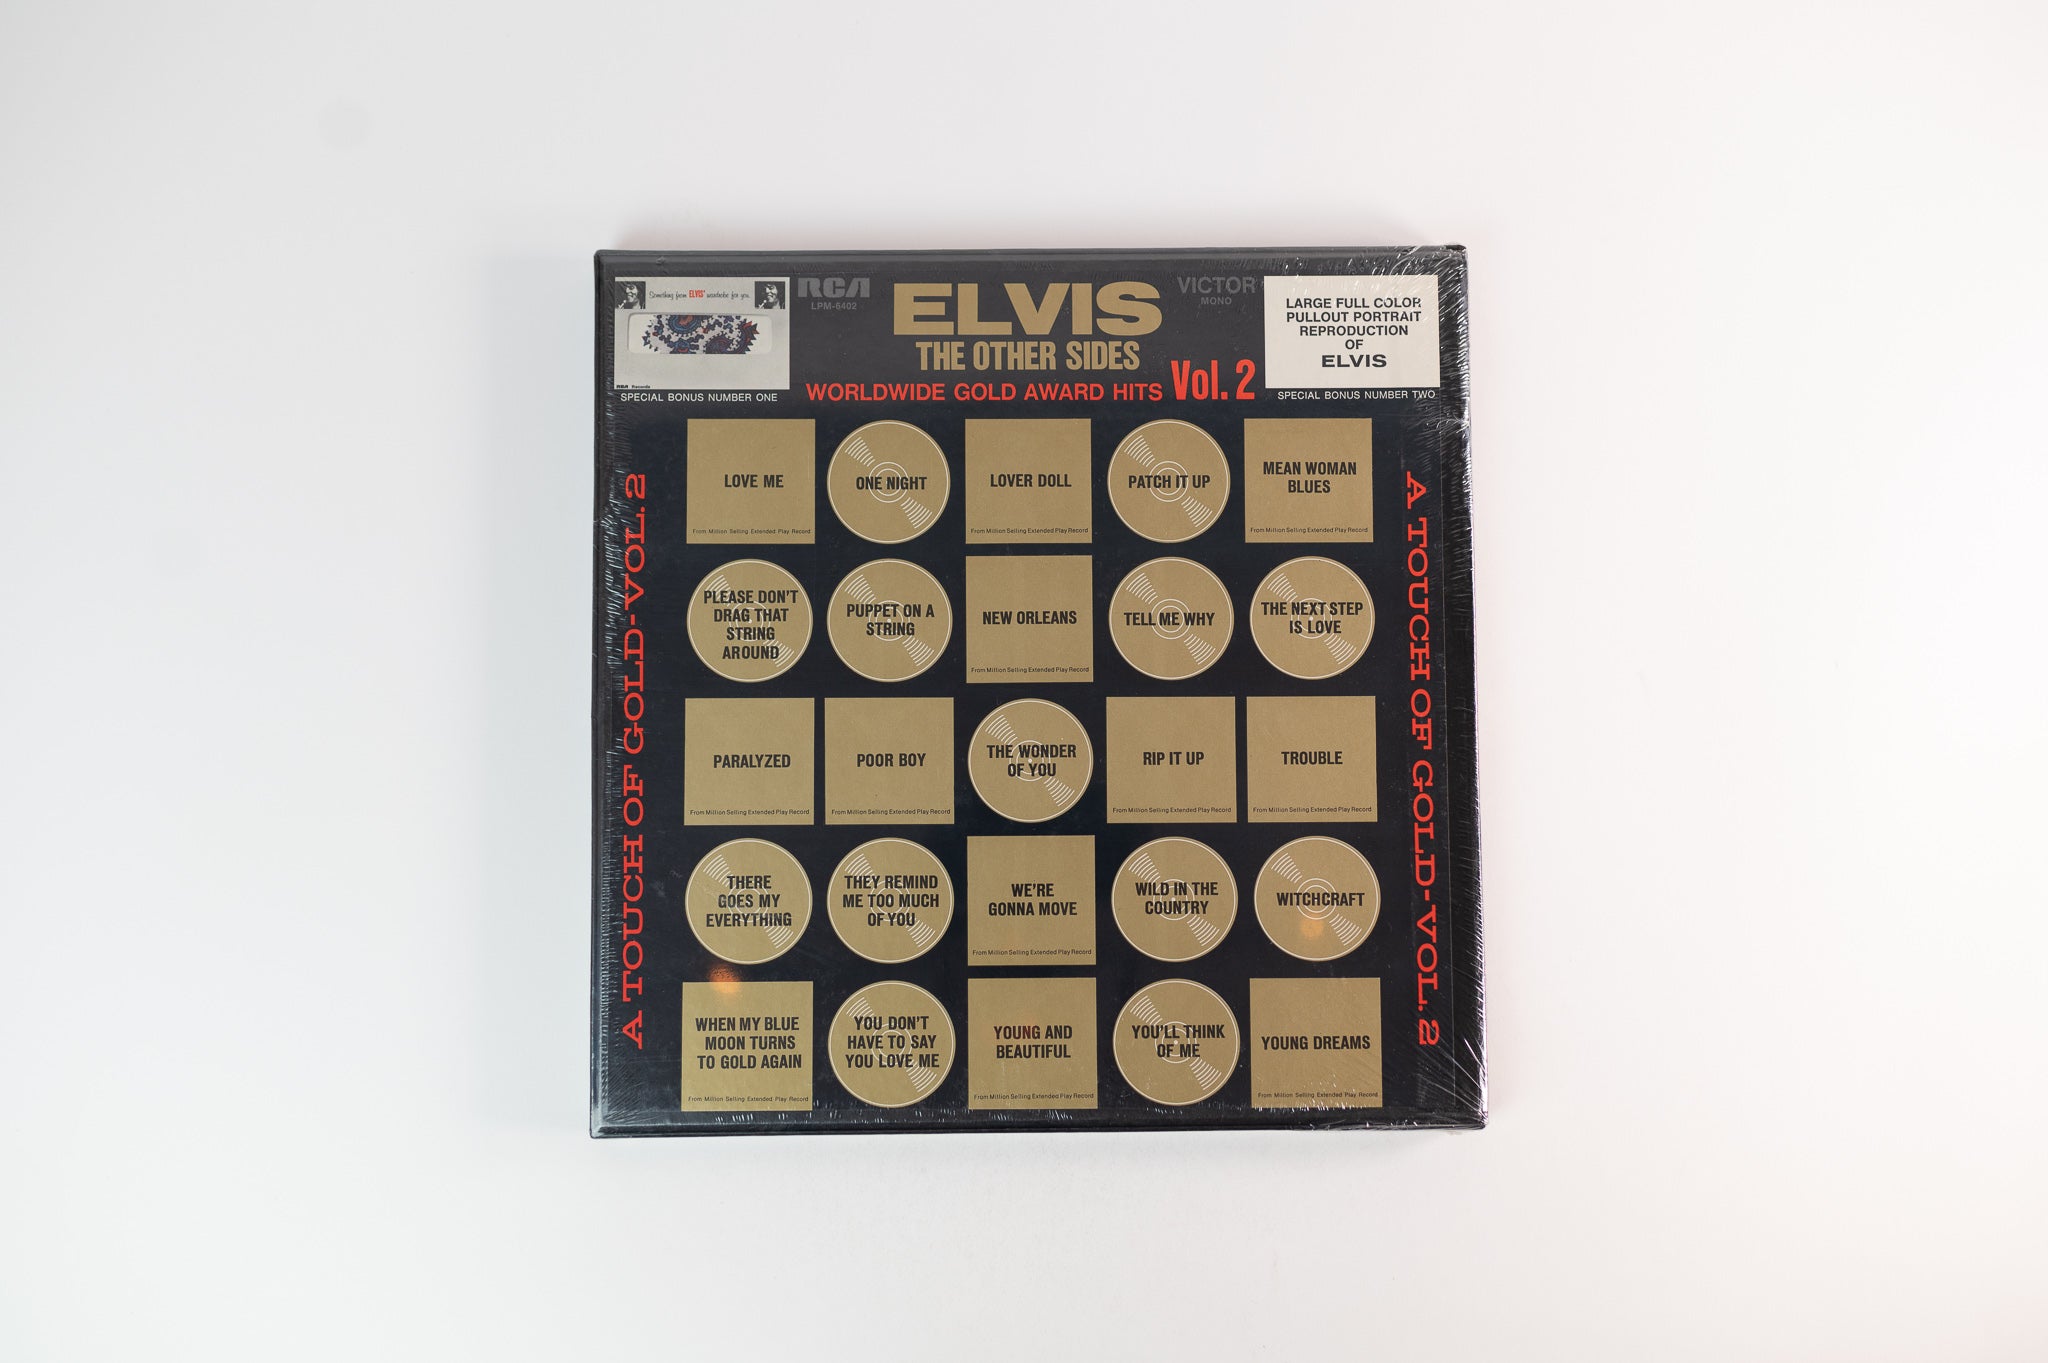 Elvis Presley - The Other Sides - Worldwide Gold Award Hits - Vol. 2 on RCA Box Set Sealed